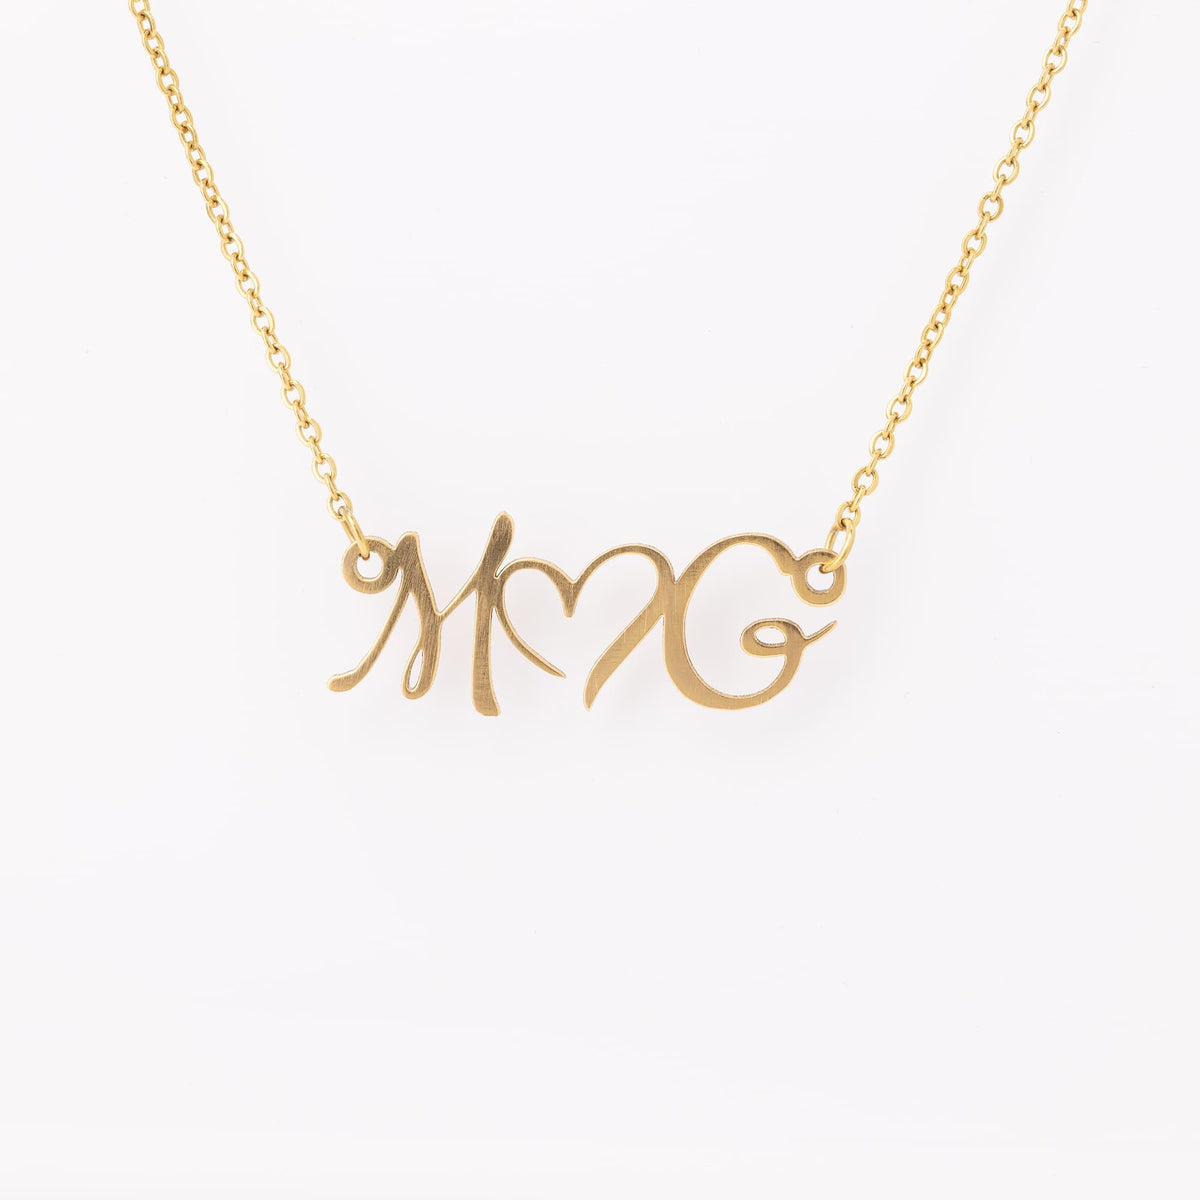 A Necklace For Lovers or Best Friends - Two Initials Joined By A Heart